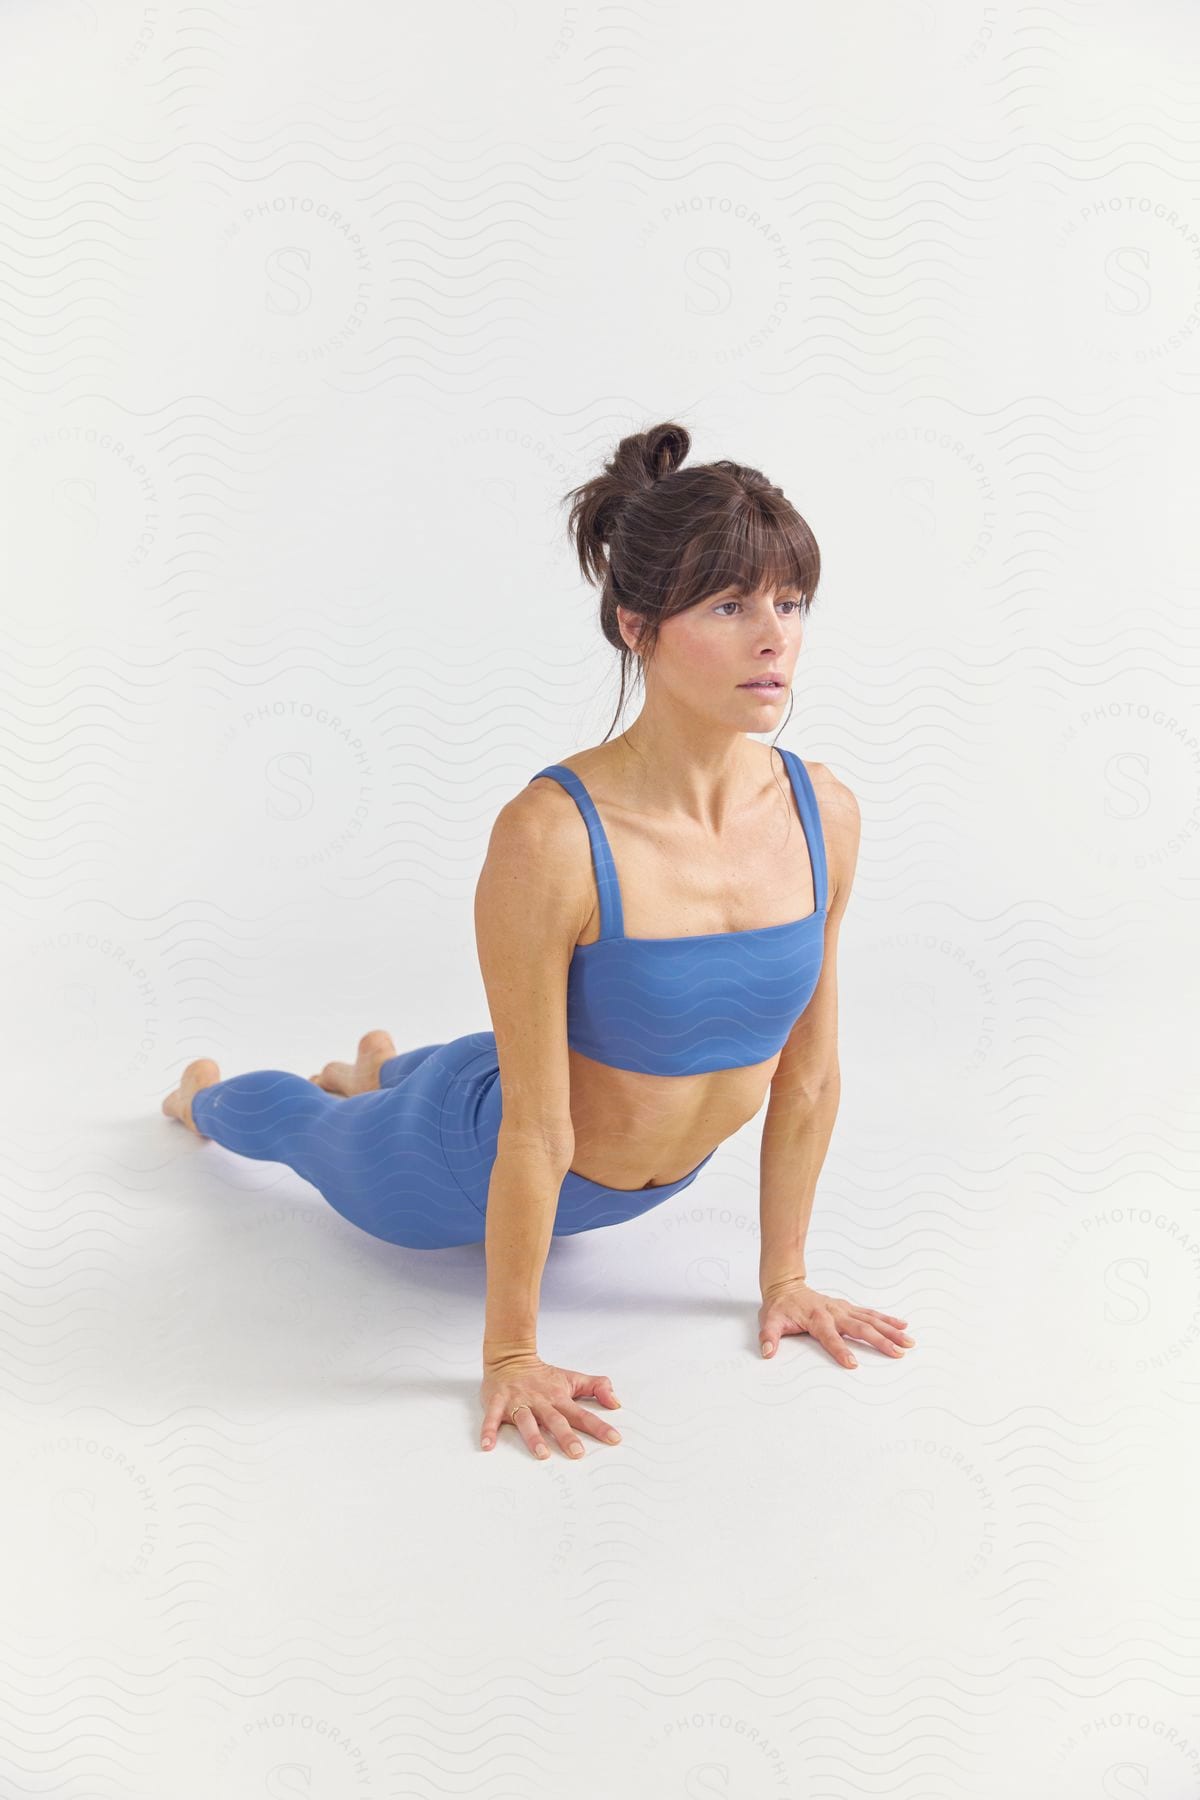 A woman practicing yoga wearing blue workout clothes.